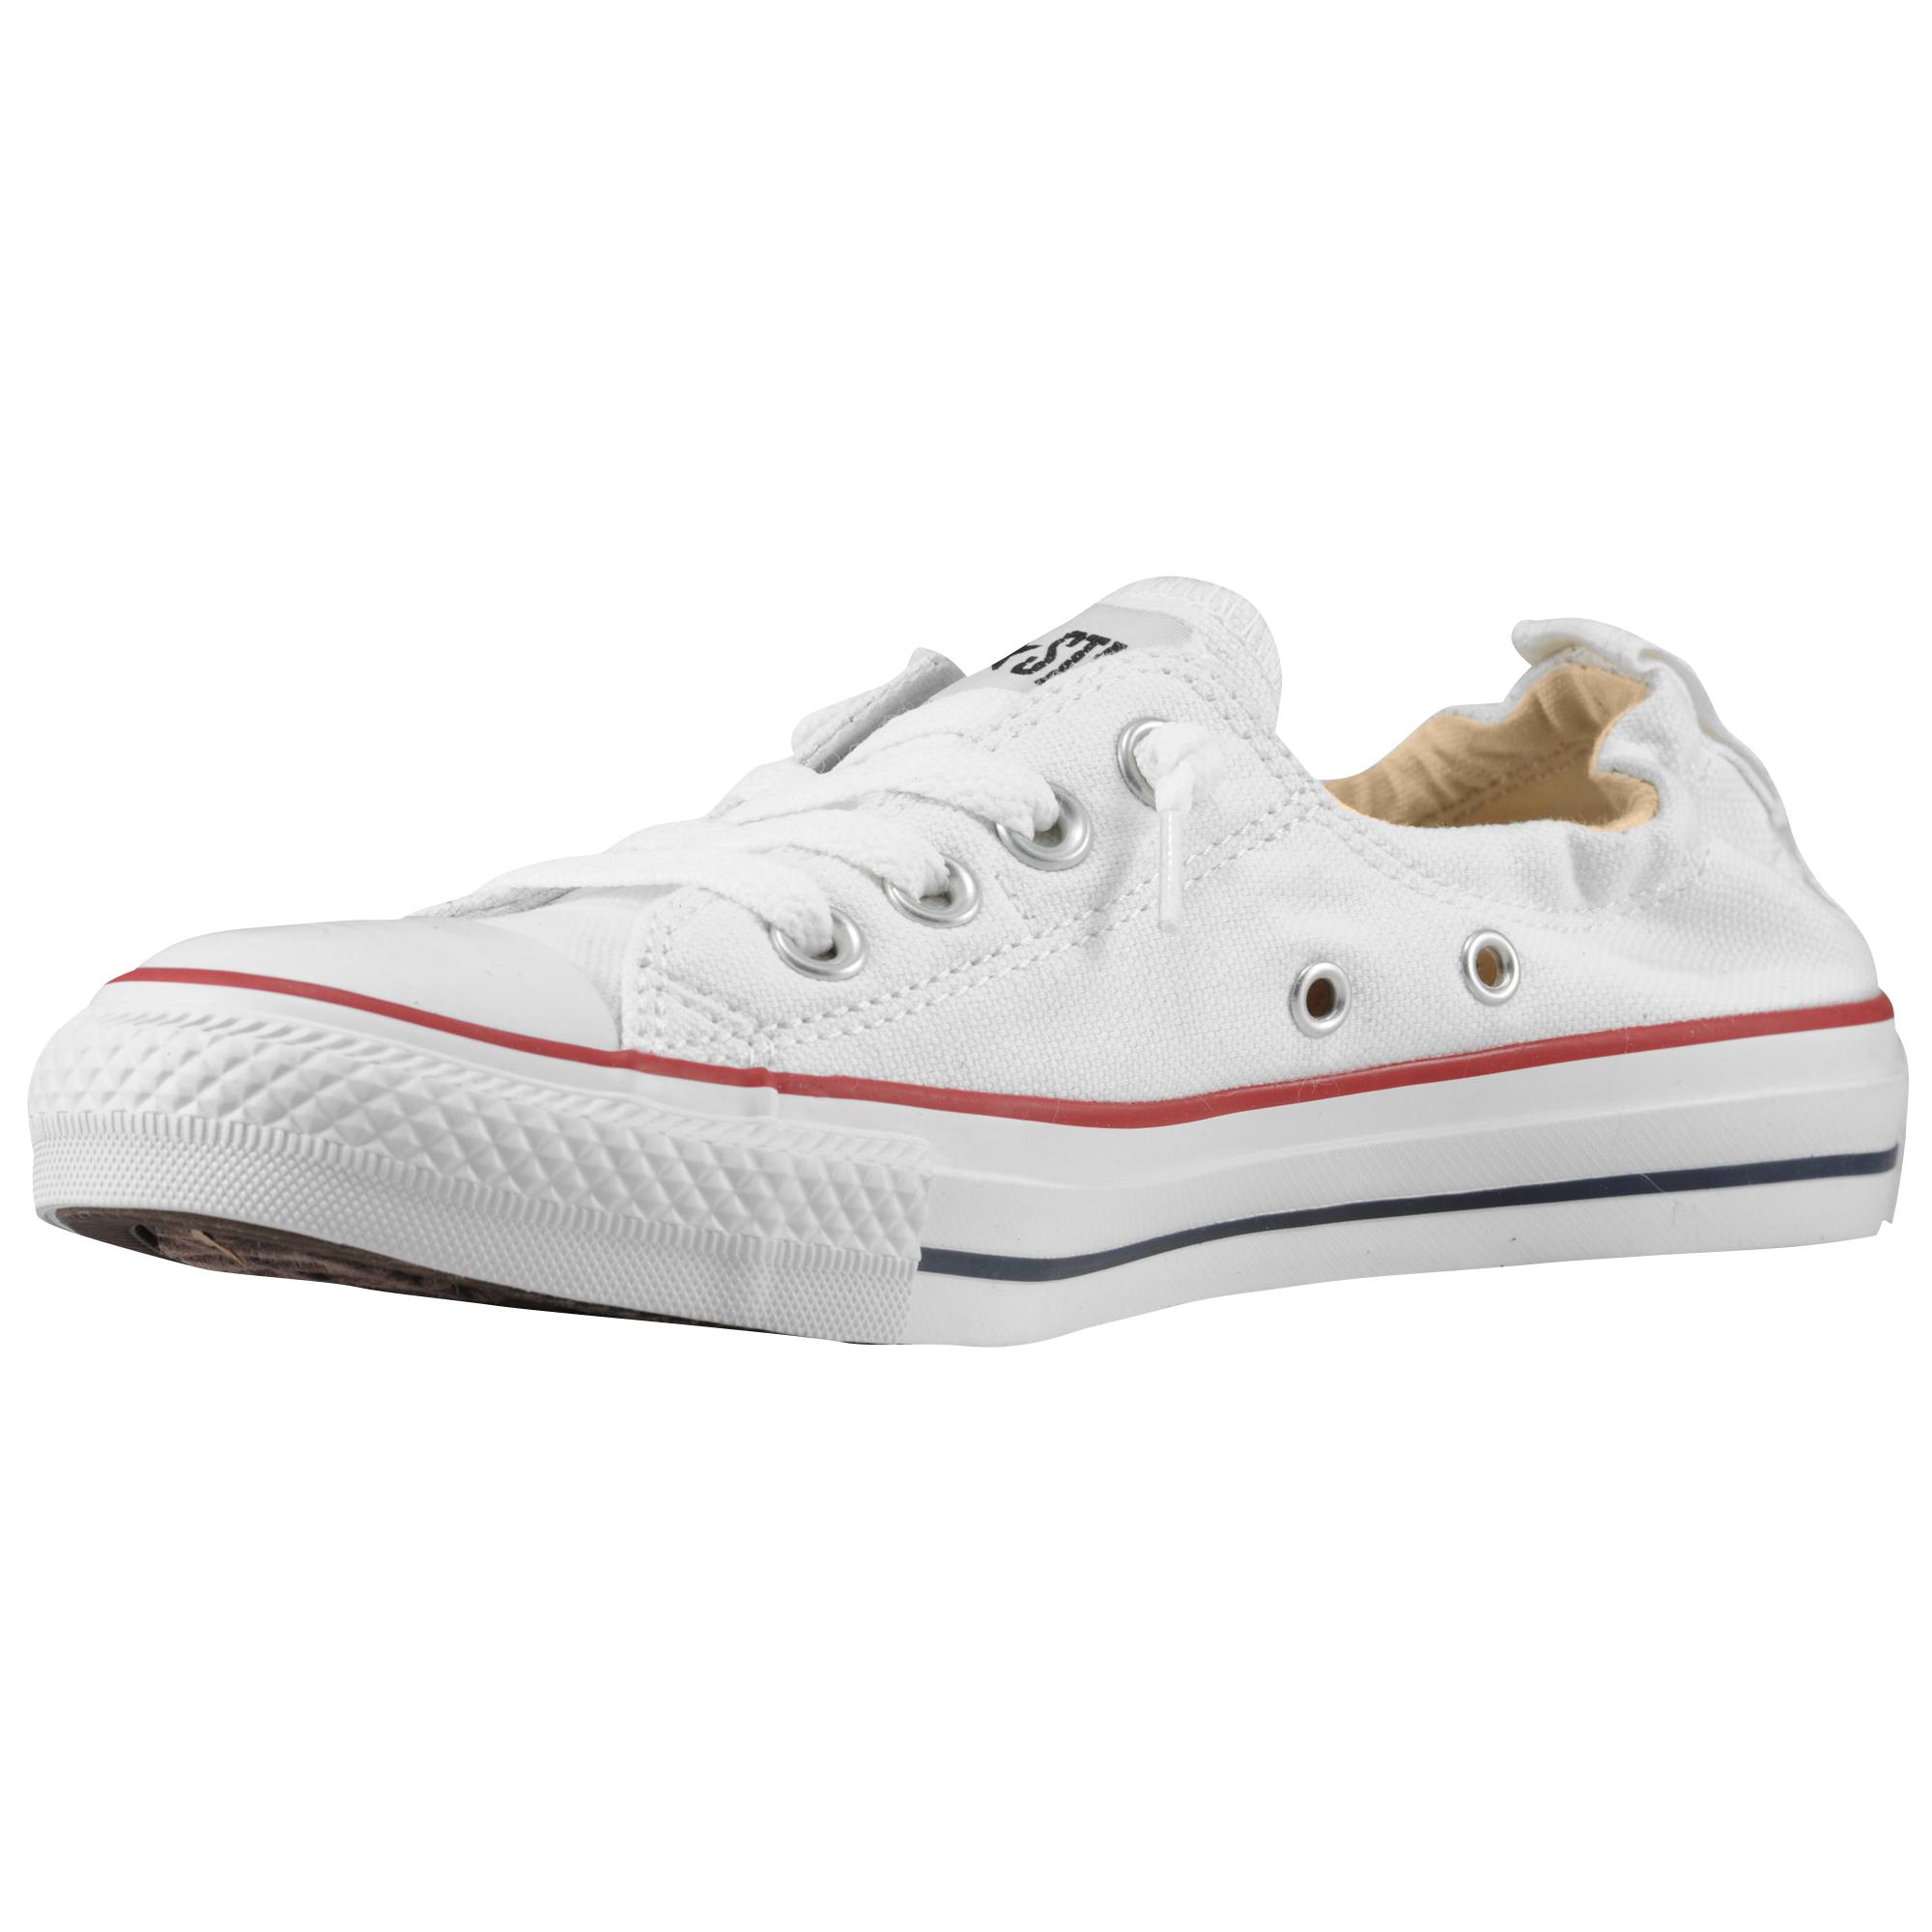 Converse Canvas All Star Shoreline Slip Sneakers in White - Lyst